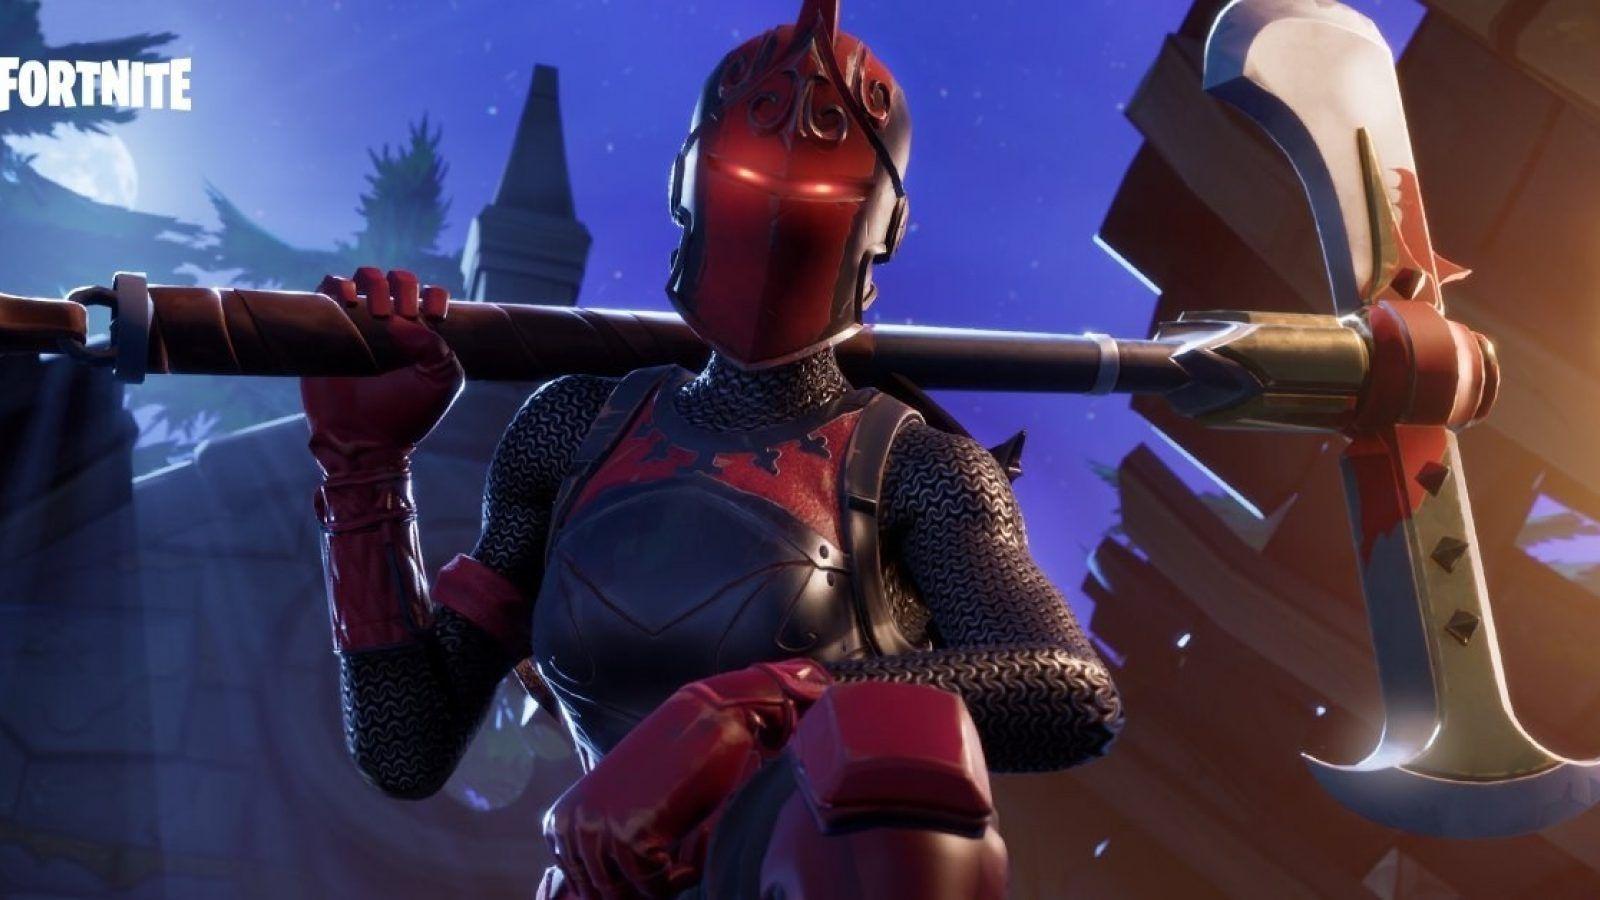 Fortnite To Re Release Rare 'Red Knight' Skin In Item Shop